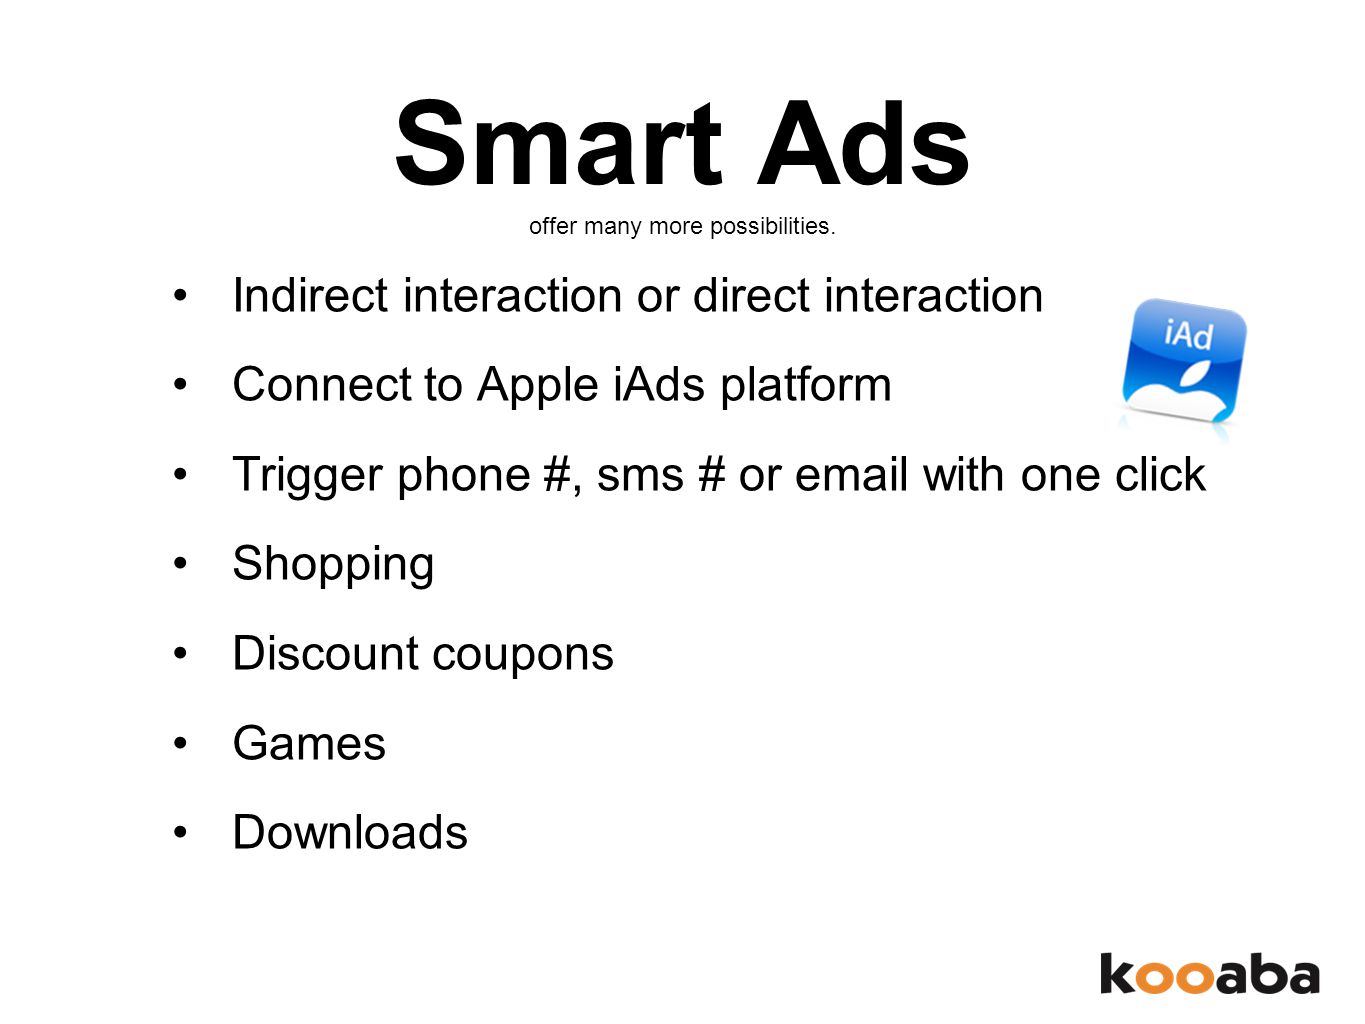 Smart Ads offer many more possibilities.